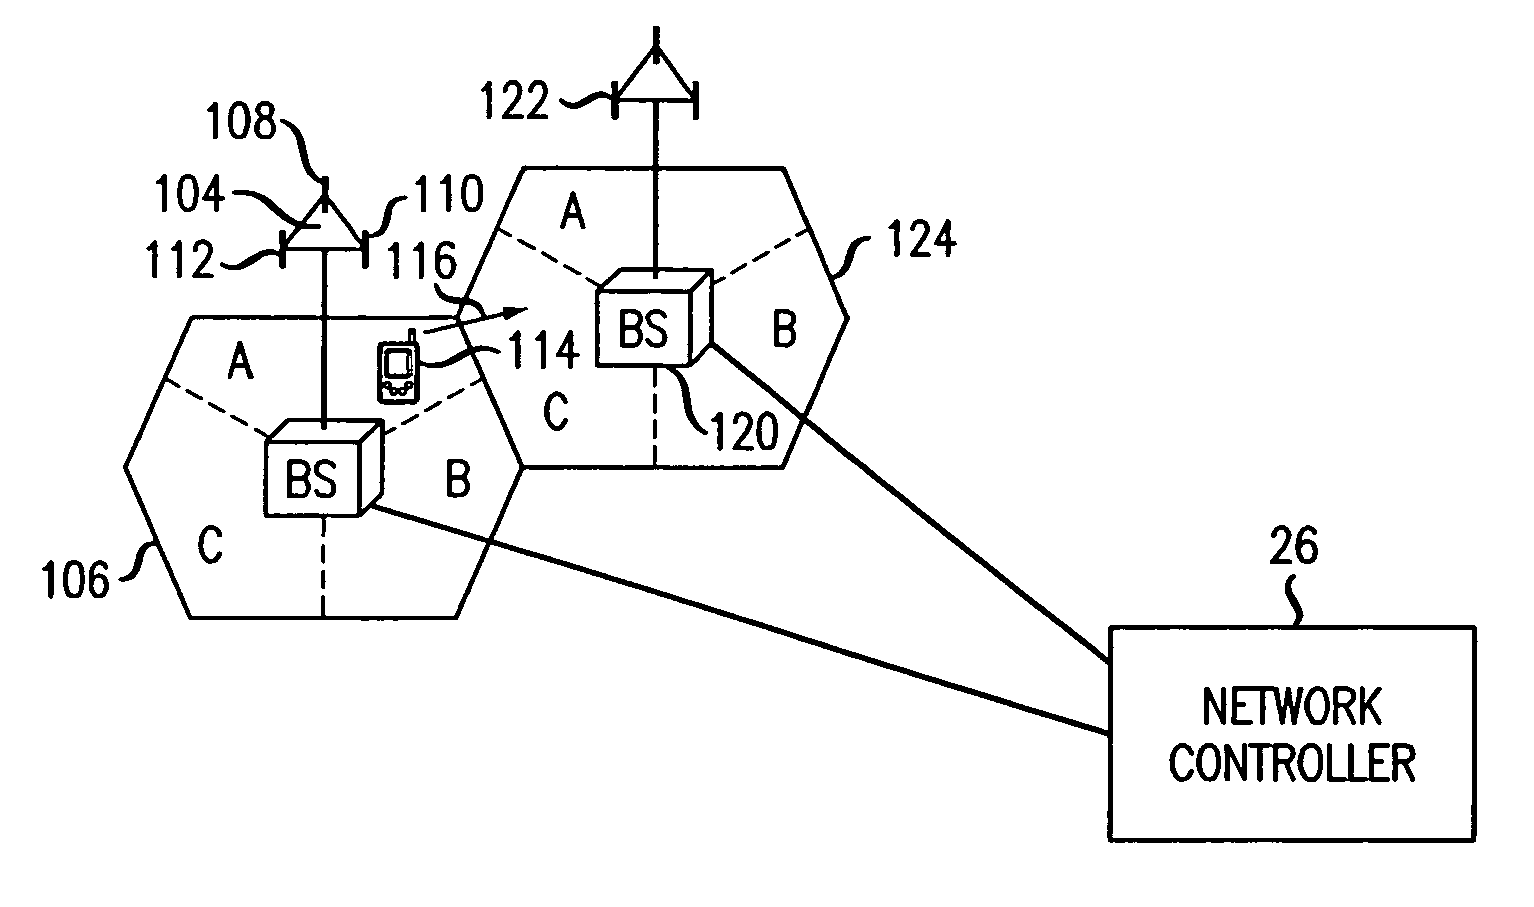 Method and apparatus for handoff in a wireless network